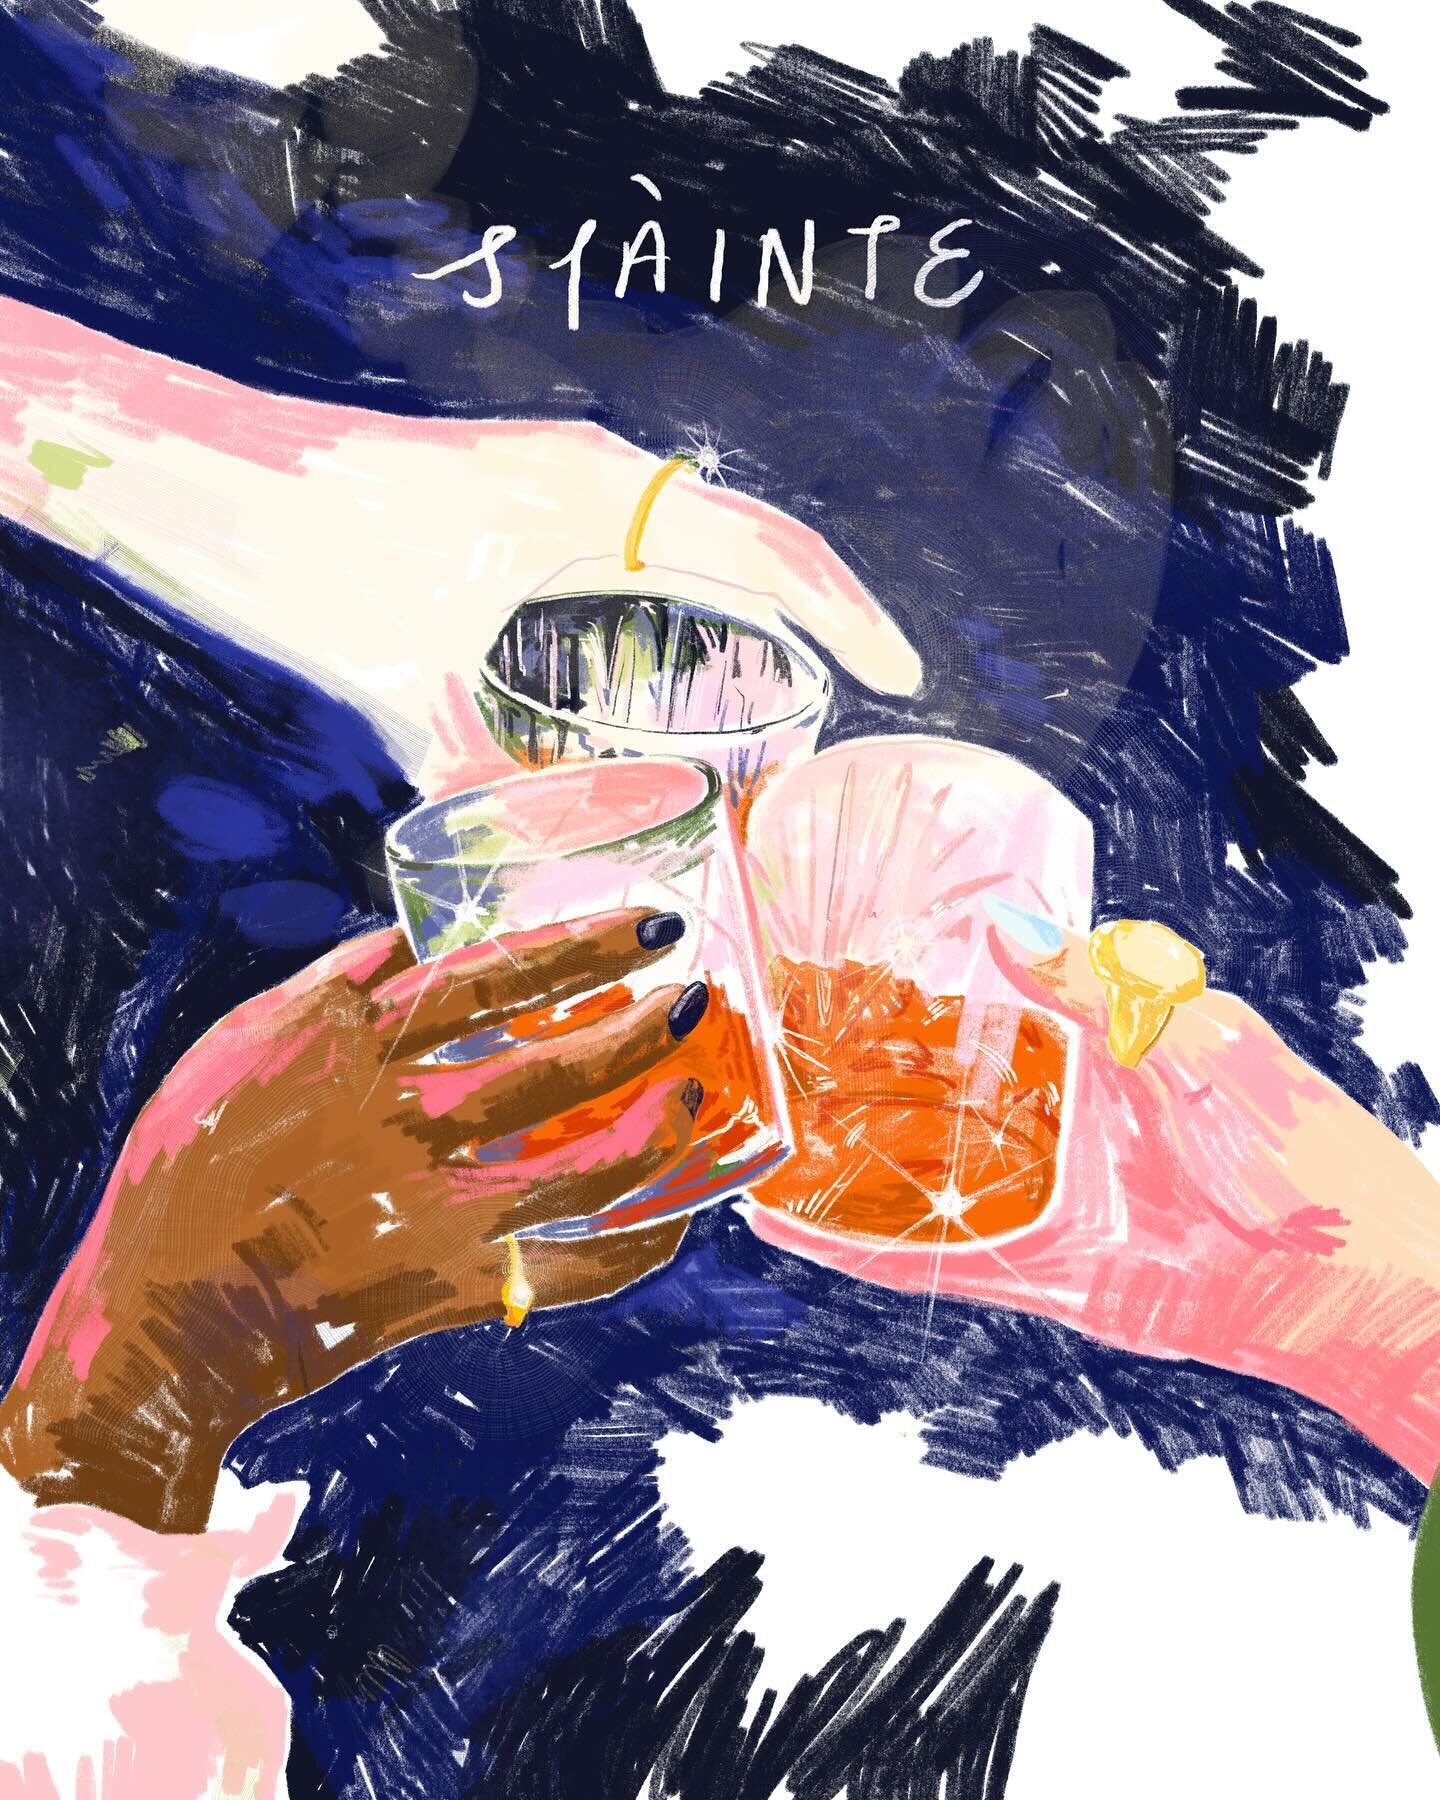 Sl&agrave;inte 
. 
To your health 🍻 chin up it&rsquo;s almost the weekend 🥃 I
.
Im realllly loving that sketchy texture coming through, I feel like this illo really looks like it&rsquo;s straight out my sketchbook - albeit with hours more work in i